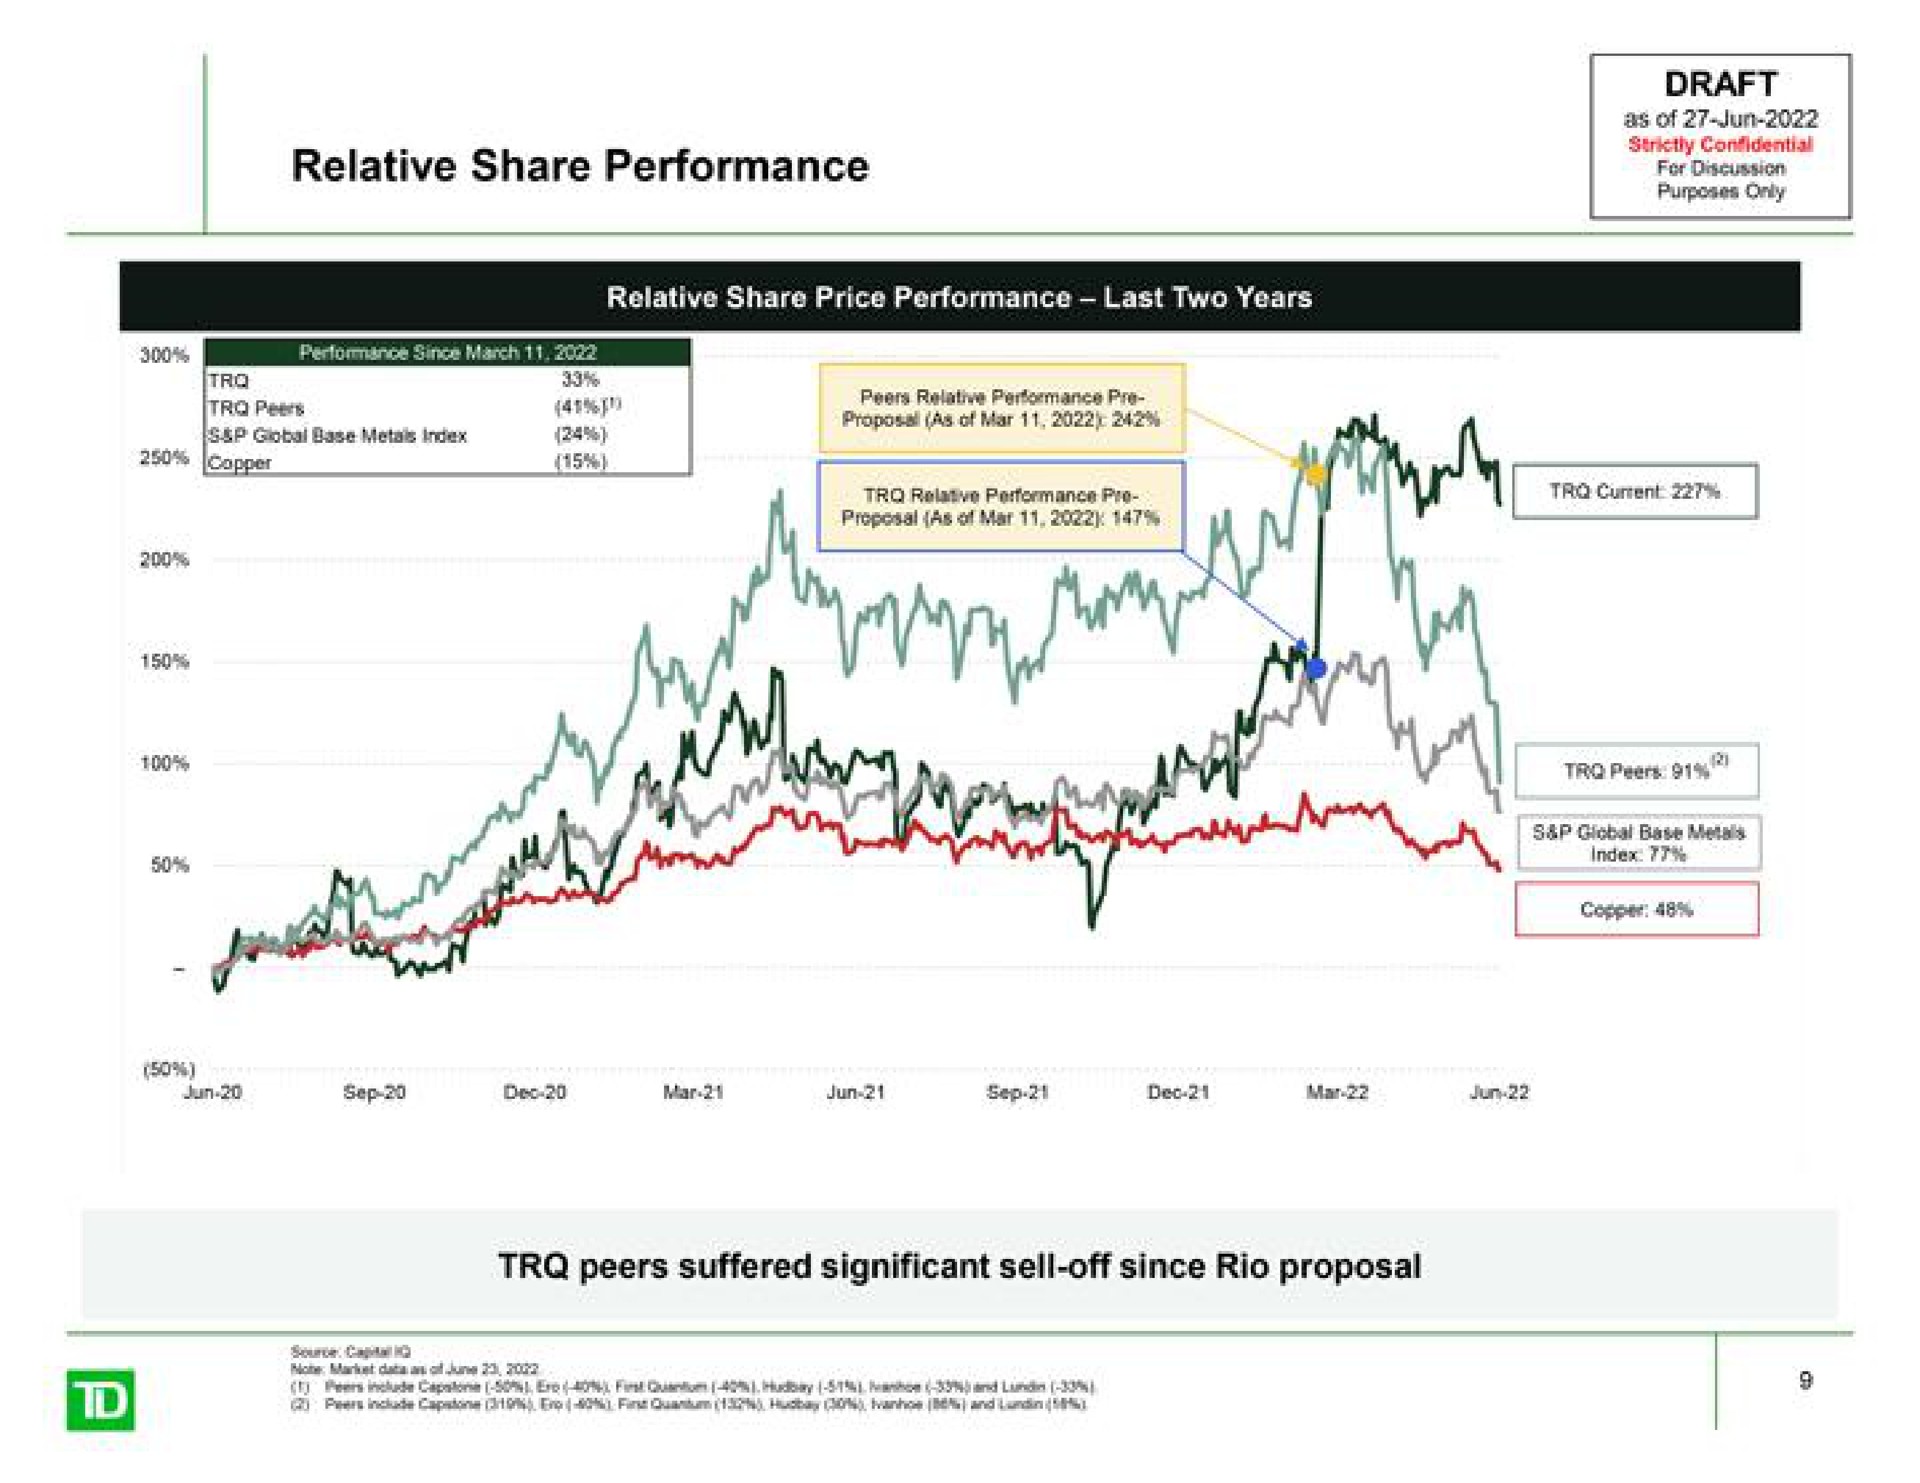 relative share performance draft as of for discussion peers suffered significant sell off since rio proposal | TD Securities